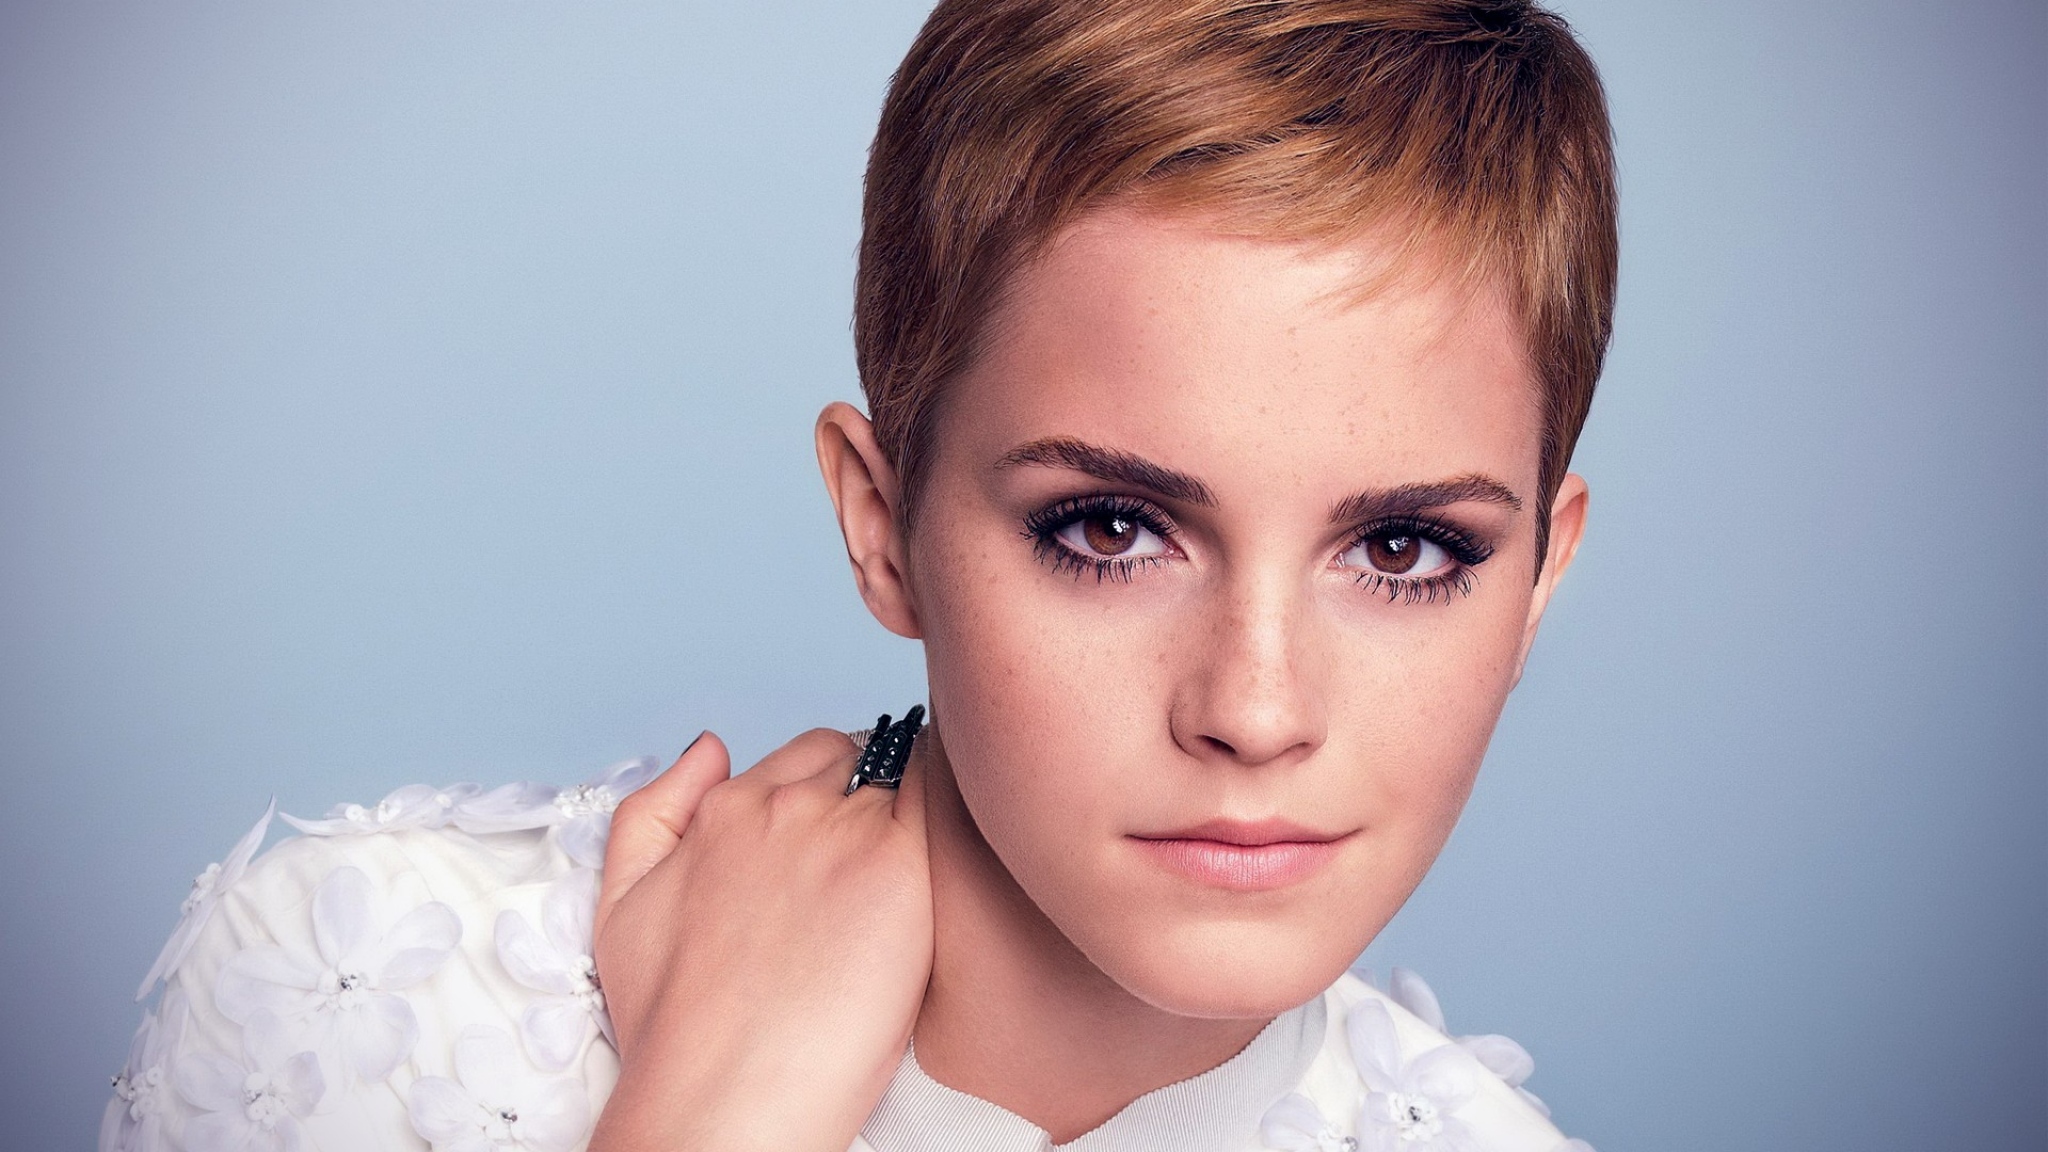 The Confession of Emma Watson’s Makeup Products